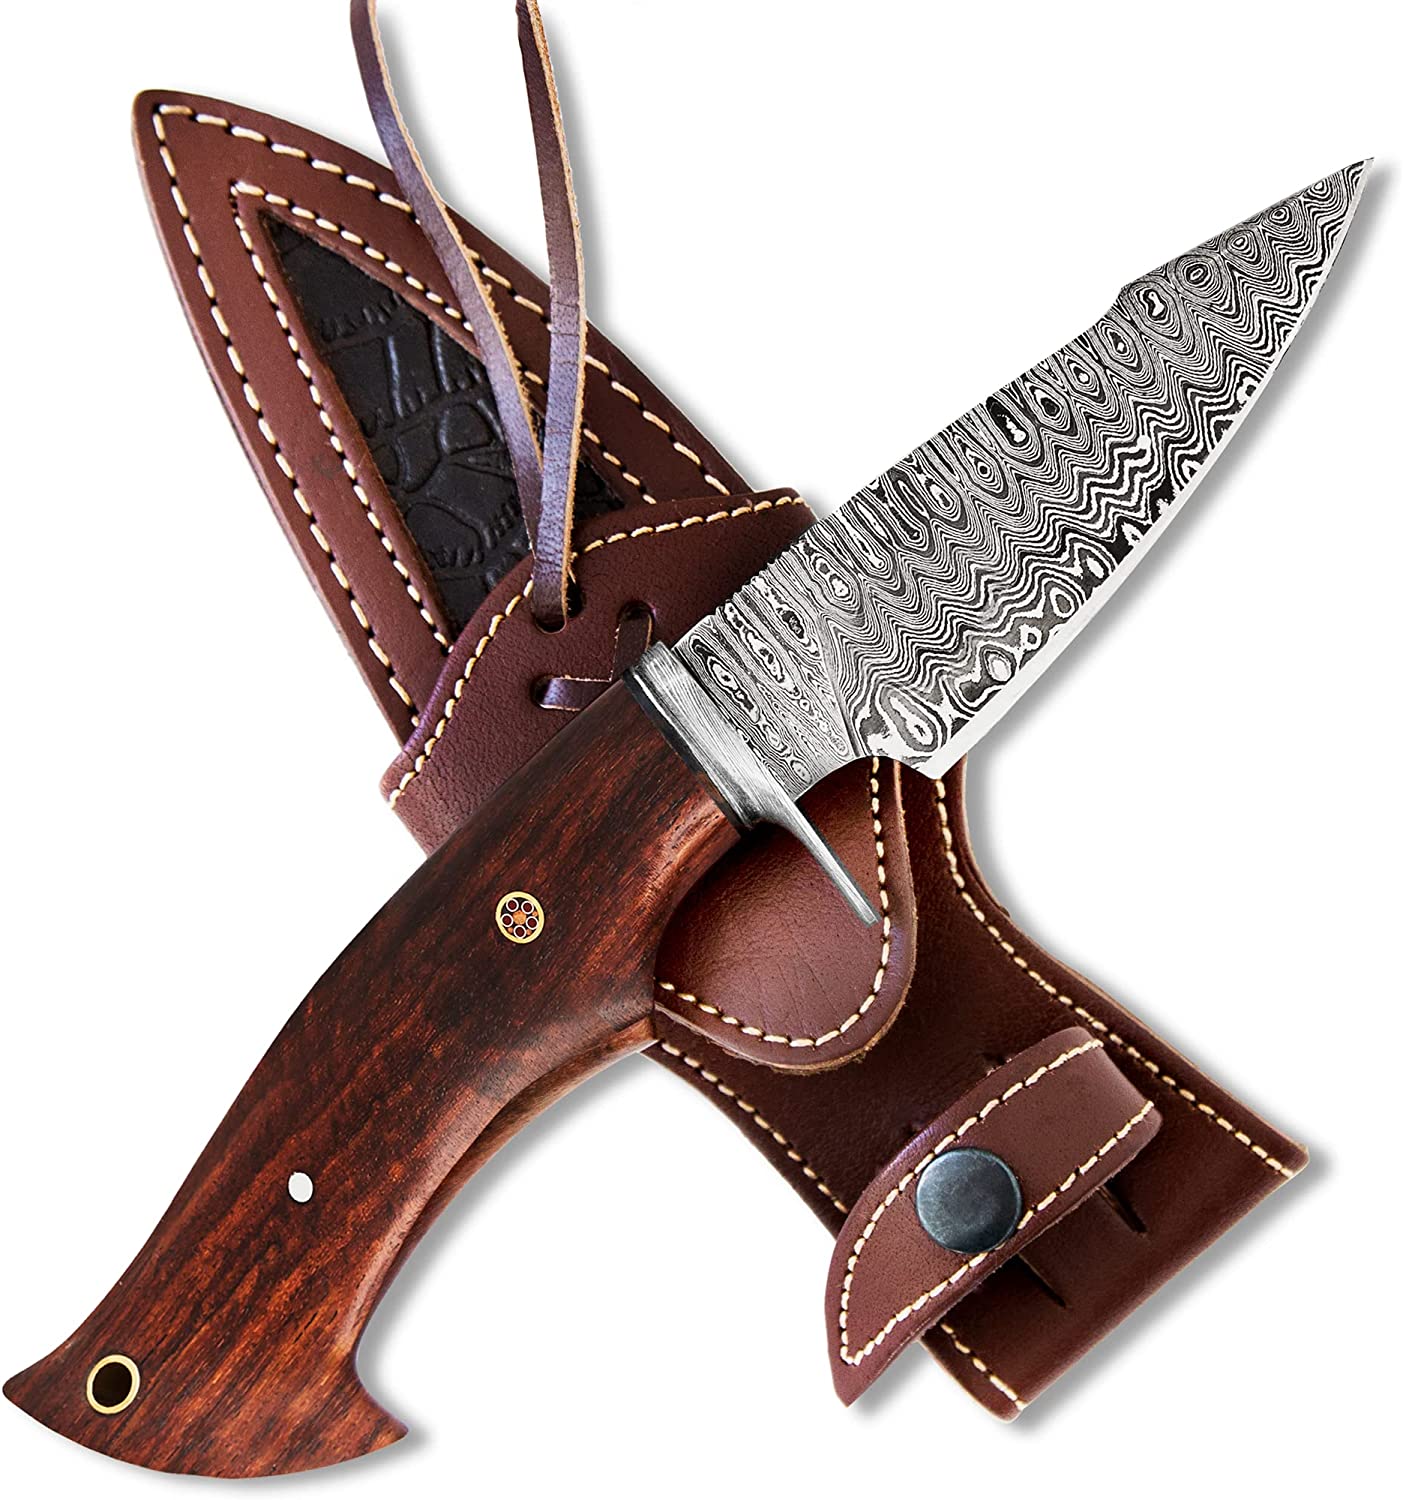  BIGCAT ROAR 10″ PATENTED Handmade Damascus Hunting Knife with  Leather Sheath - Ideal for Skinning, Camping, Outdoor - EDC Fixed Blade  Bushcraft Knife with Walnut Wood Handle - Predator Hunter : Everything Else